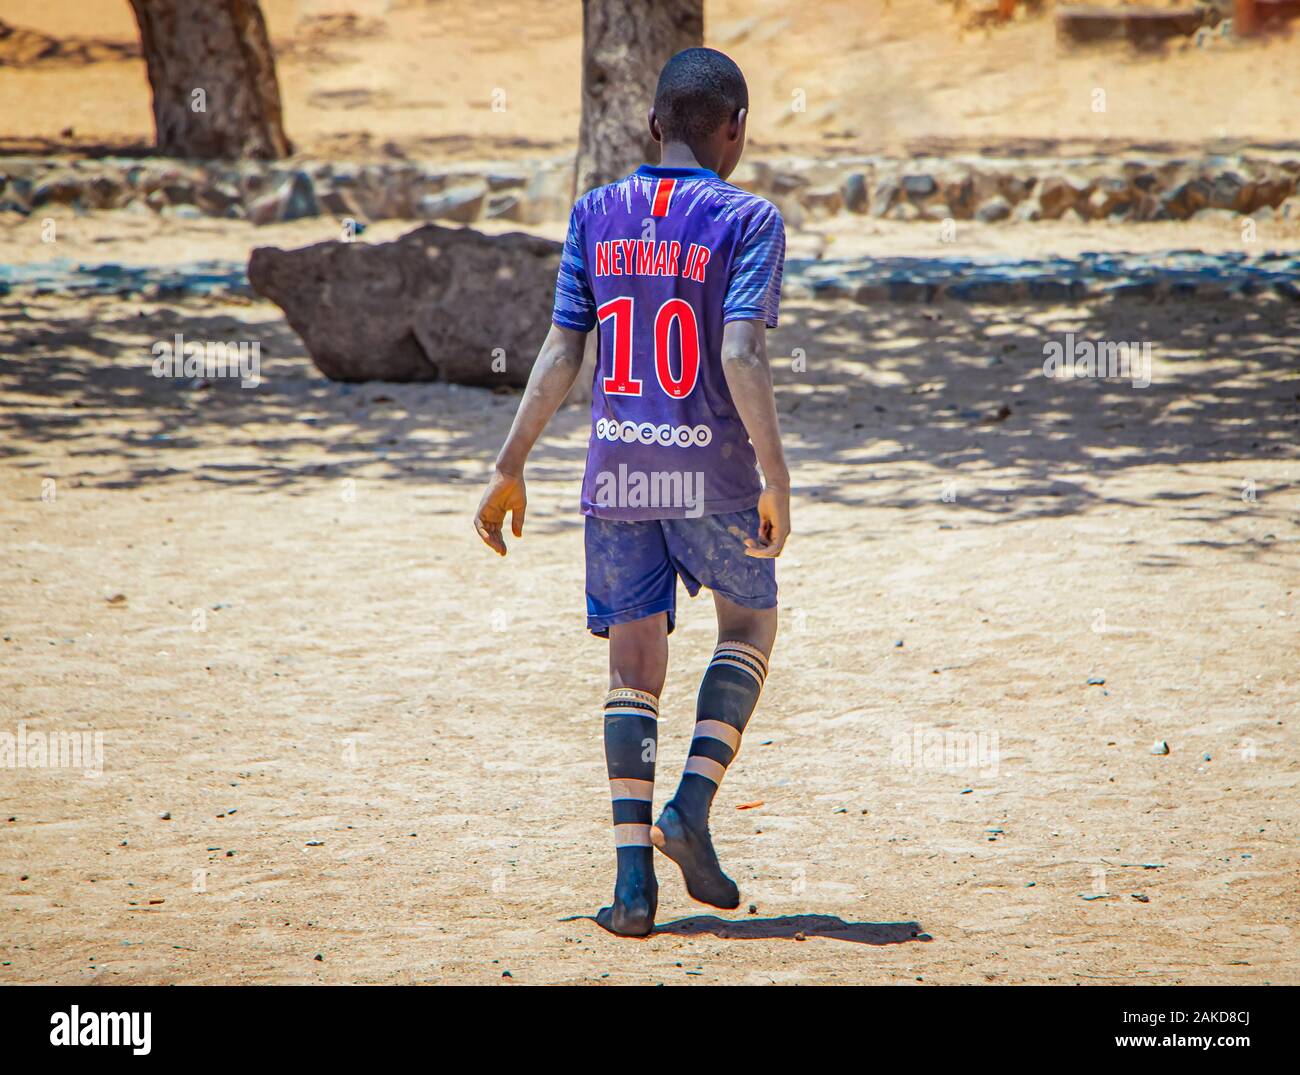 Goree island, Senegal- April 22 2019: Unidentified boy play soccer on the beach in the town in Africa. The boy is wearing a football jersey. Stock Photo